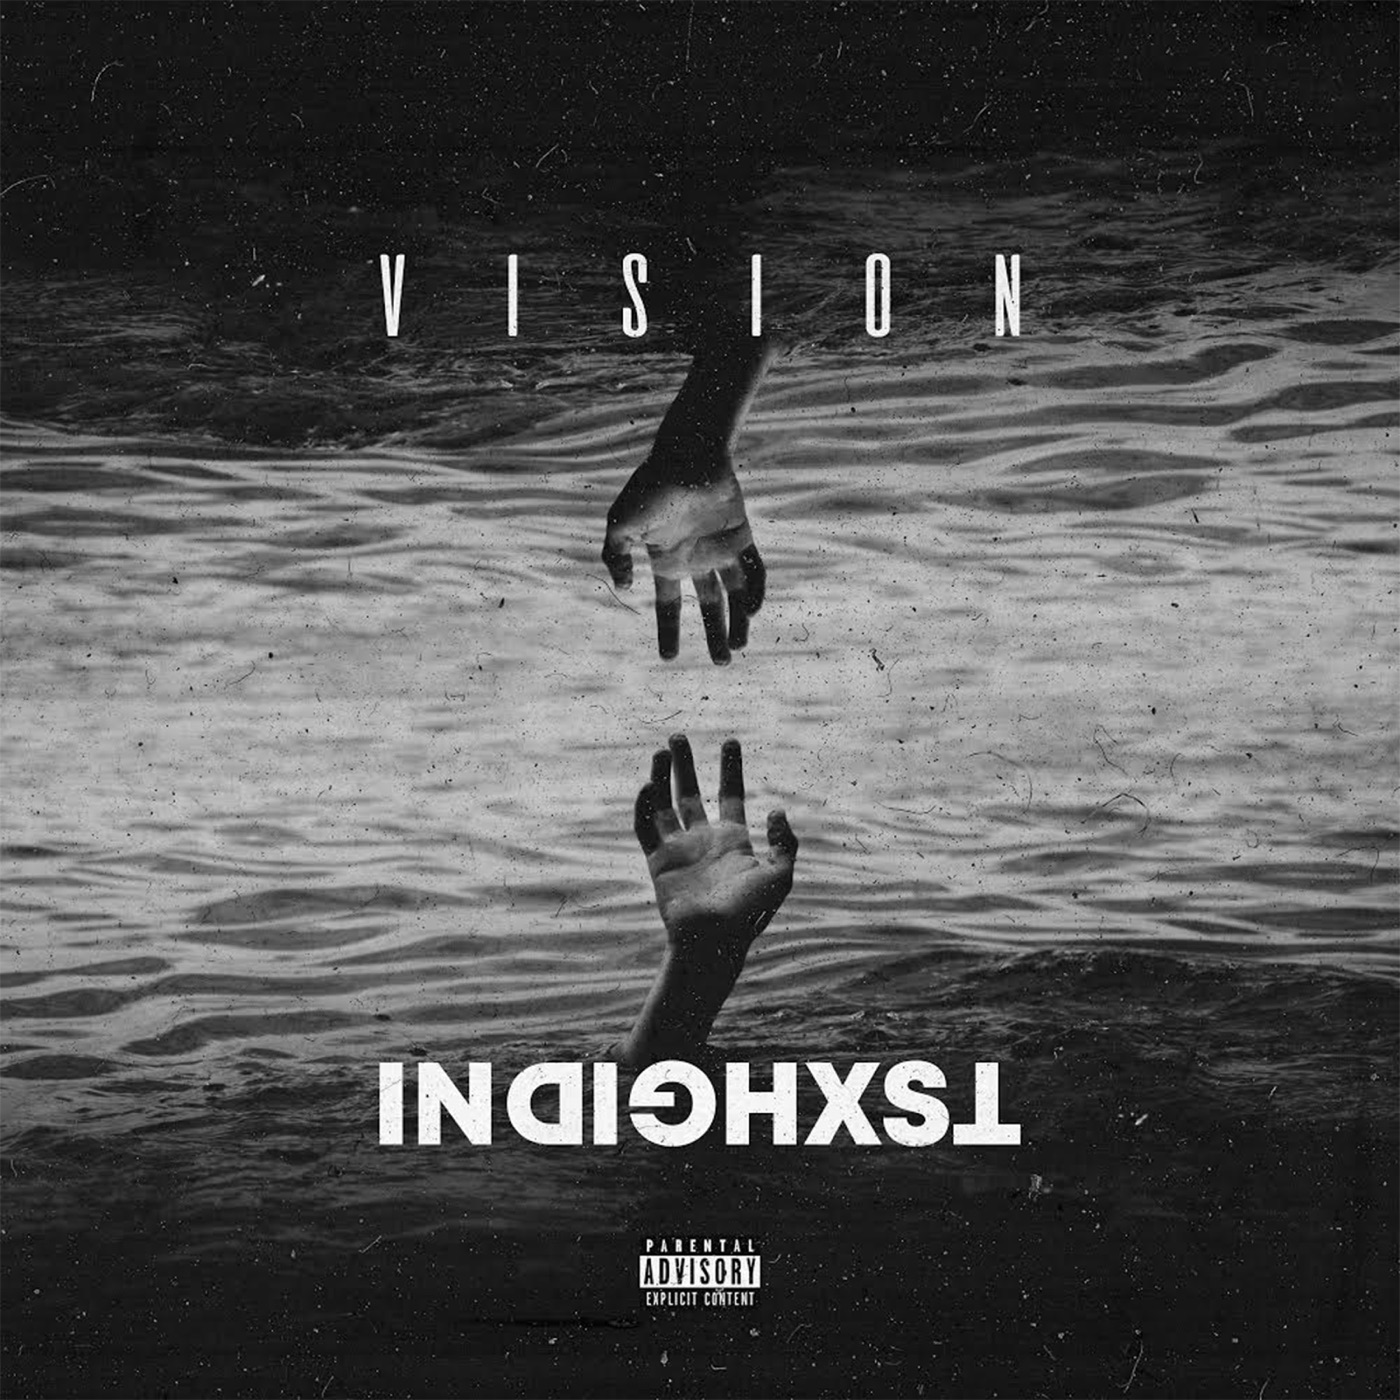 Indighxst - Vision [single] (2019)